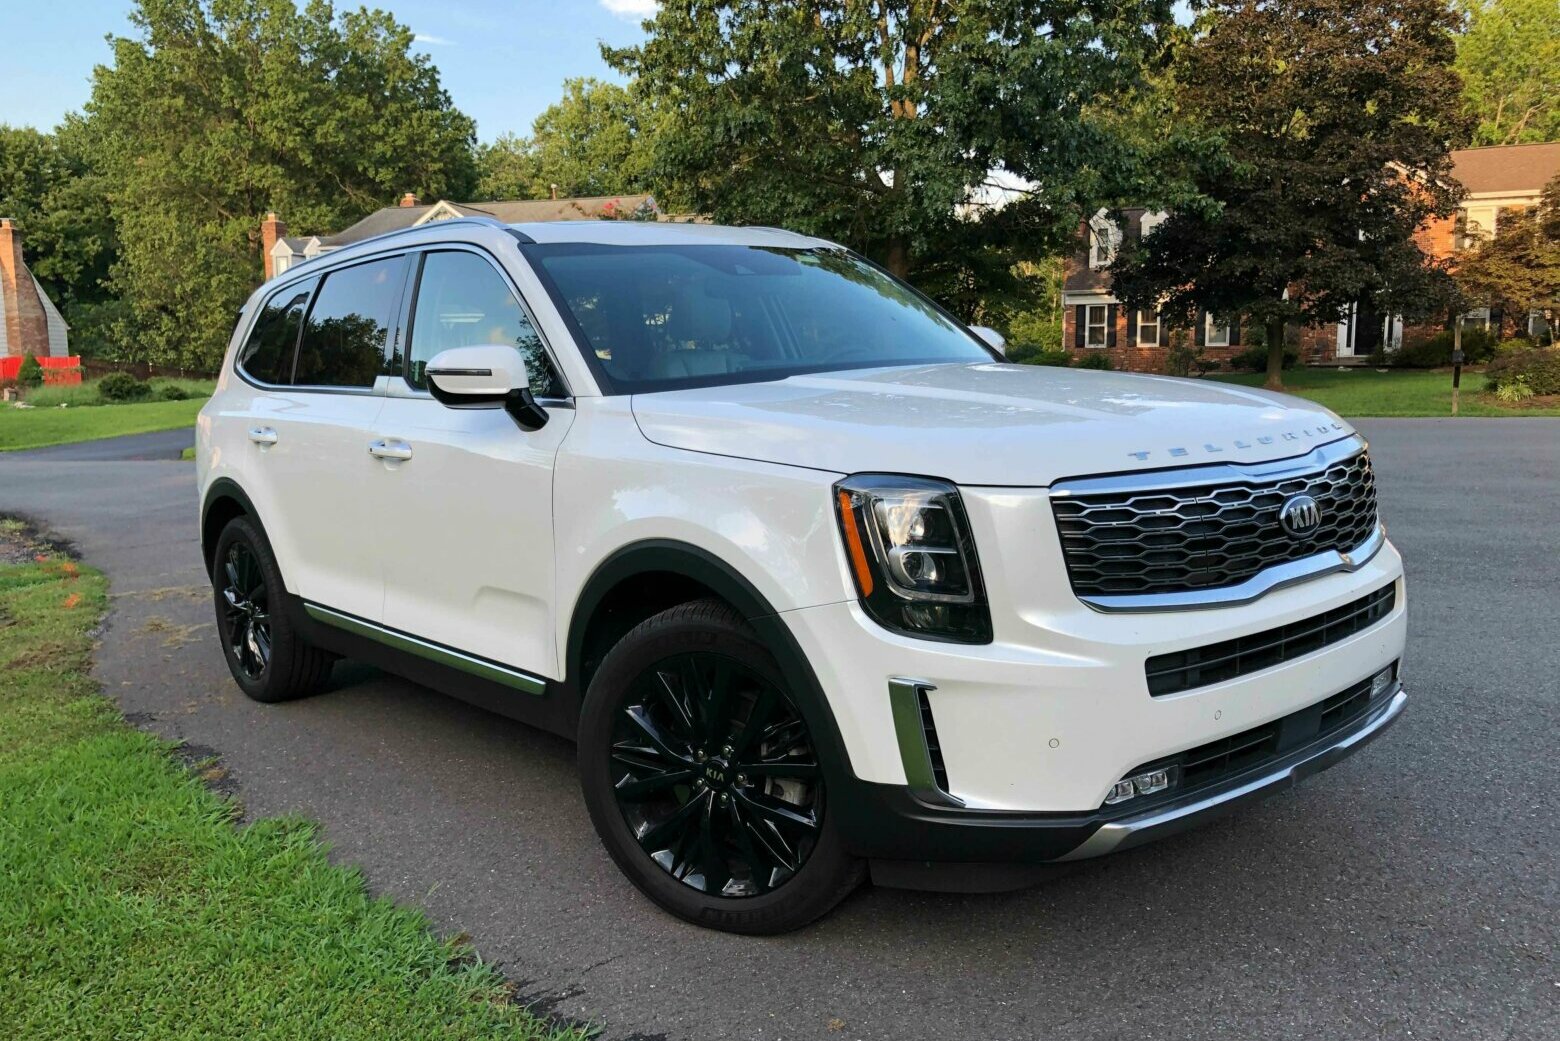 Car Review: Kia Telluride SX mixes size and luxury for a surprisingly